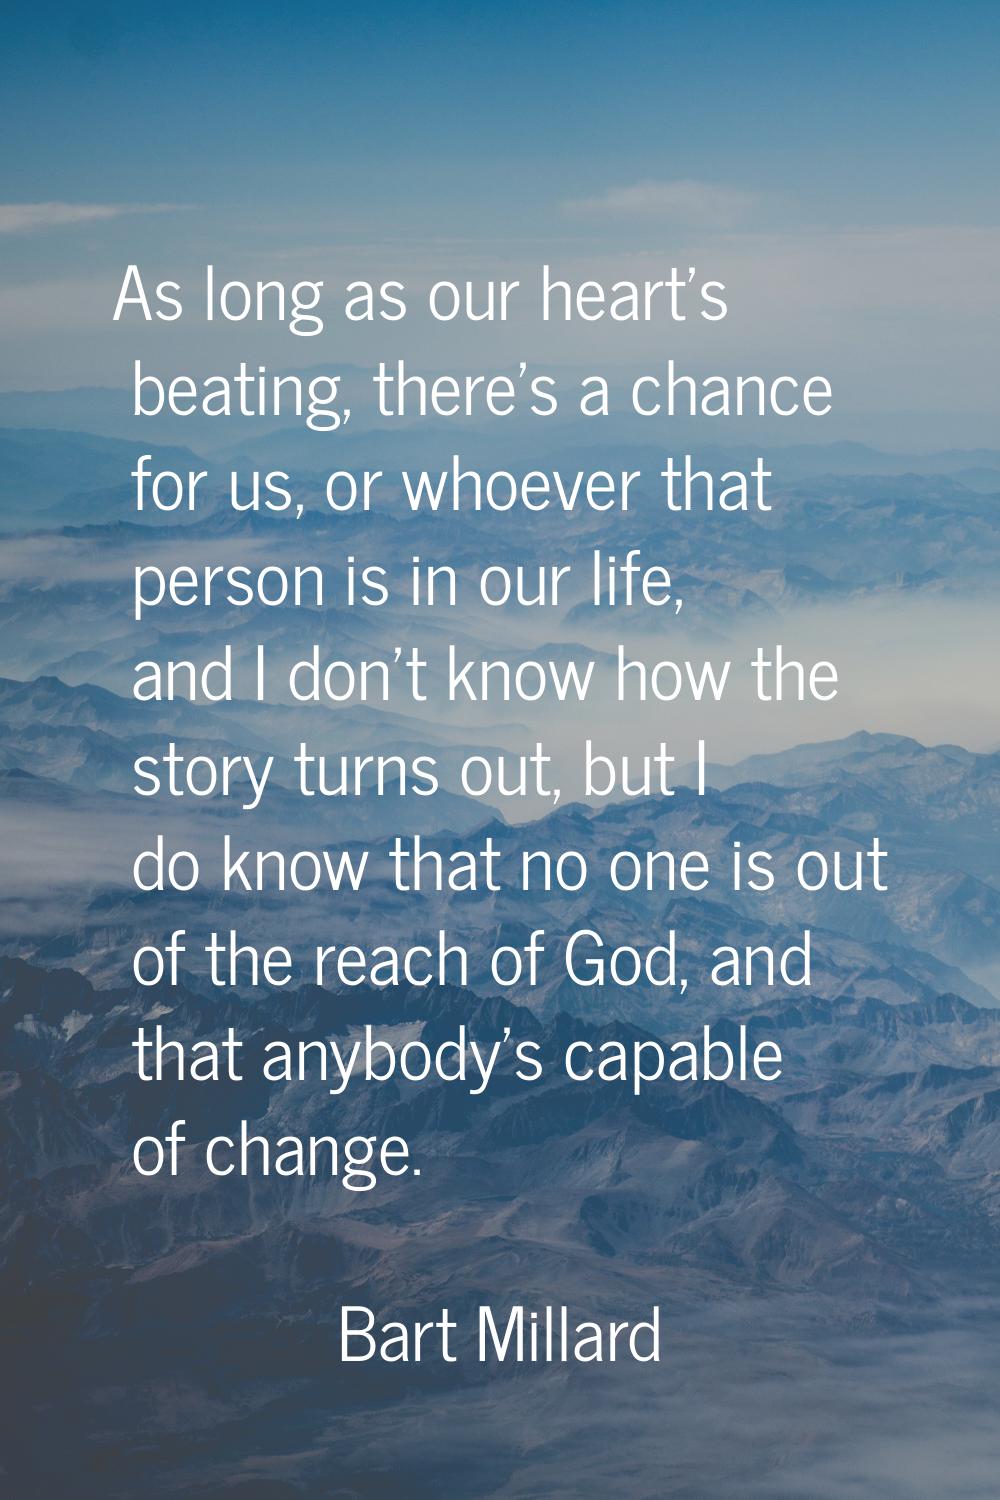 As long as our heart's beating, there's a chance for us, or whoever that person is in our life, and